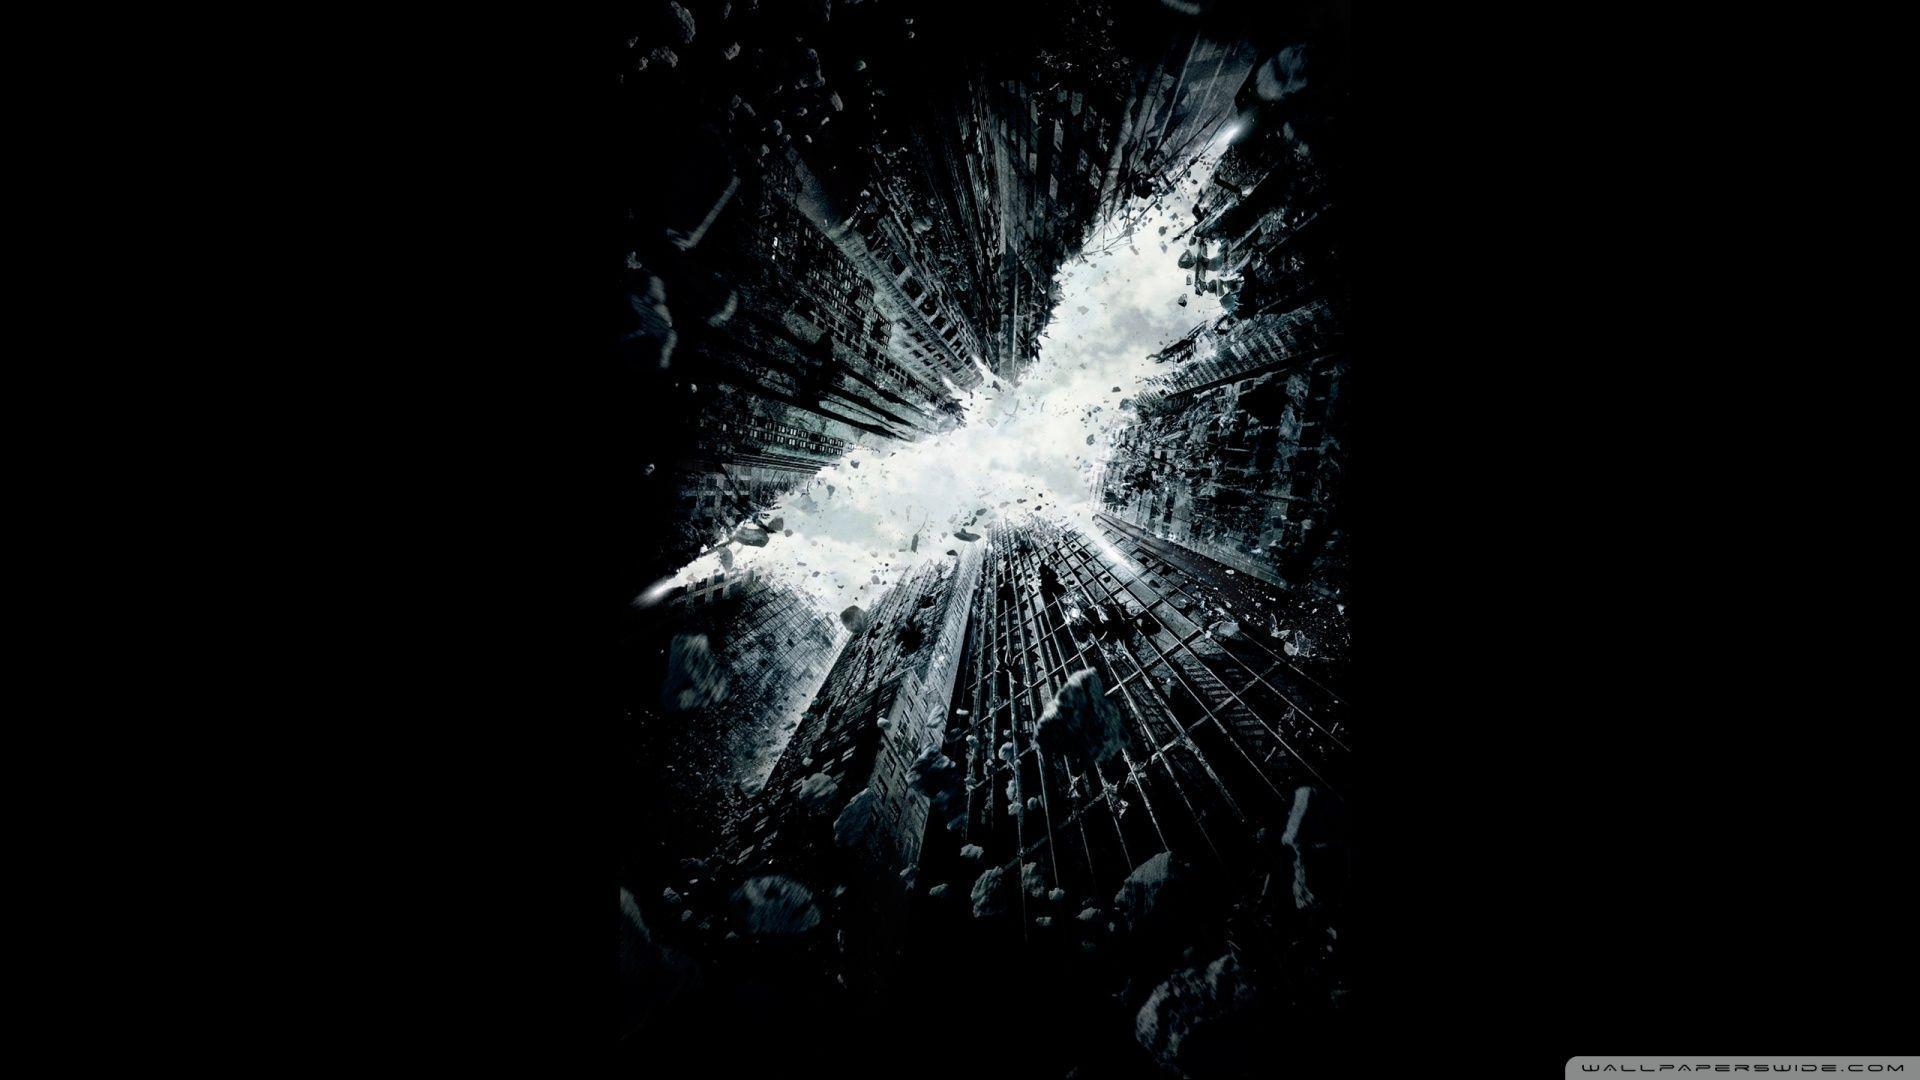 Wallpaper. The Dark Knight Rises. I'll be the judge of that